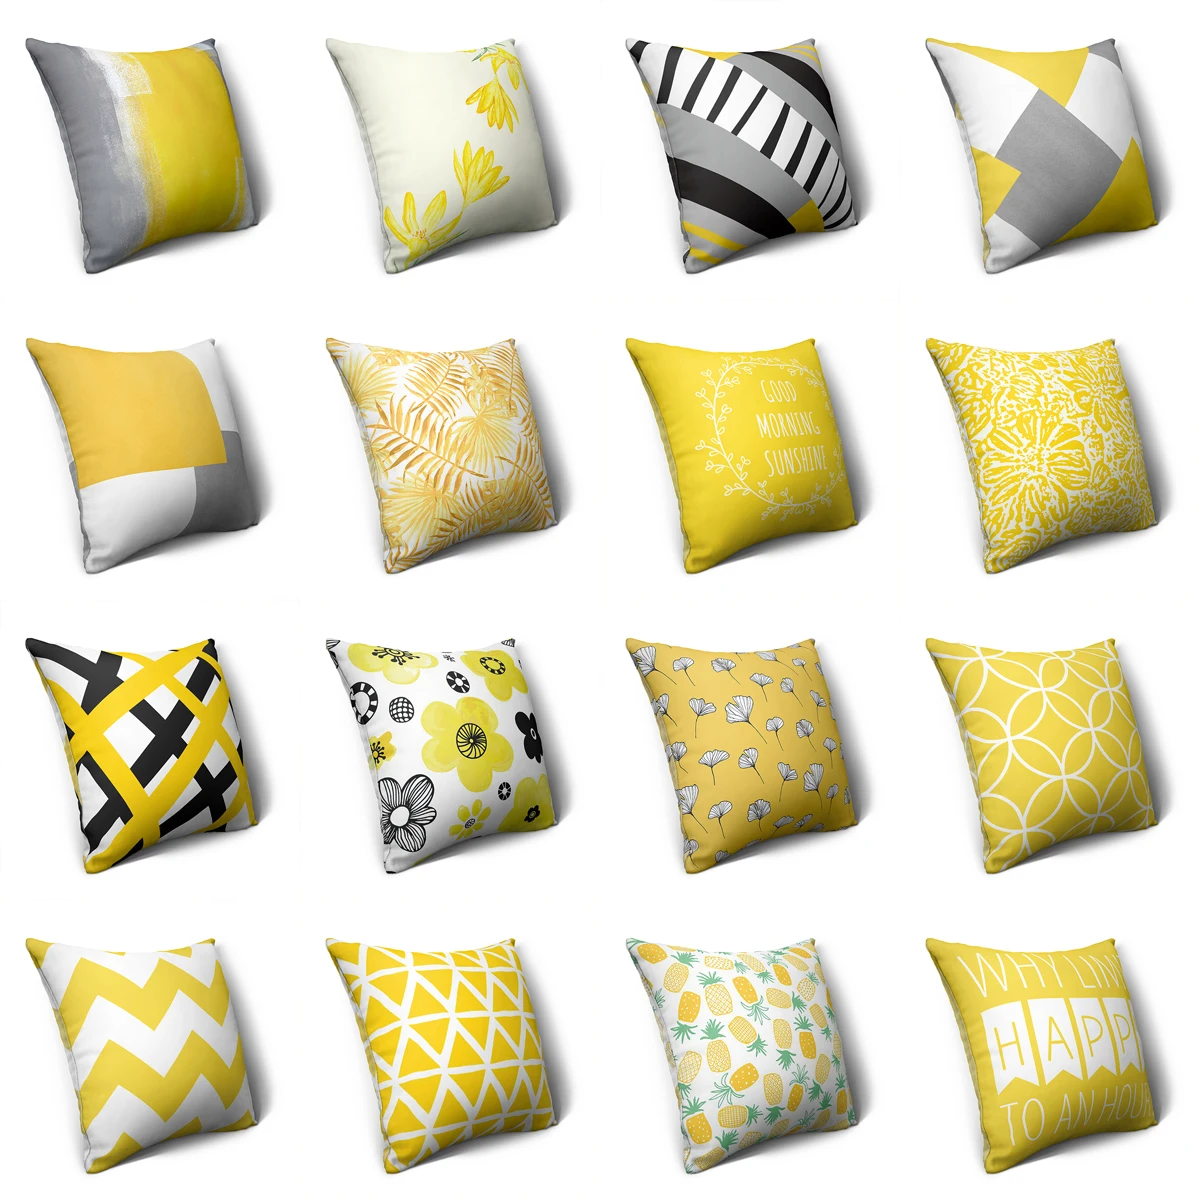 

ZHENHE Yellow Abstract Geometry Pillow Case Double Sided Printing Cushion Cover for Bedroom Sofa Balcony Decor 18x18 Inch